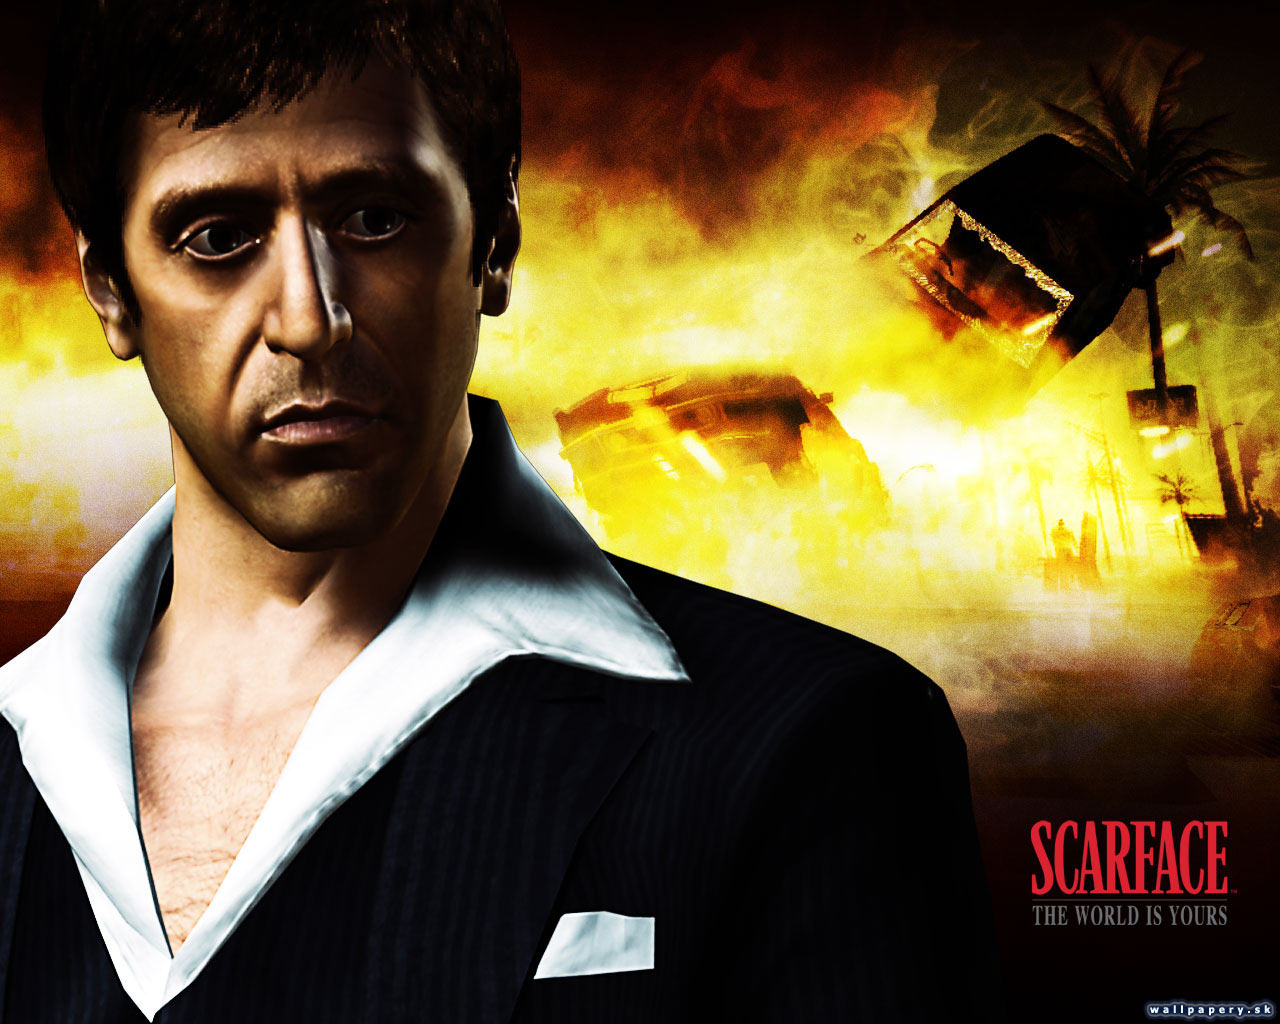 Scarface: The World Is Yours - wallpaper 3